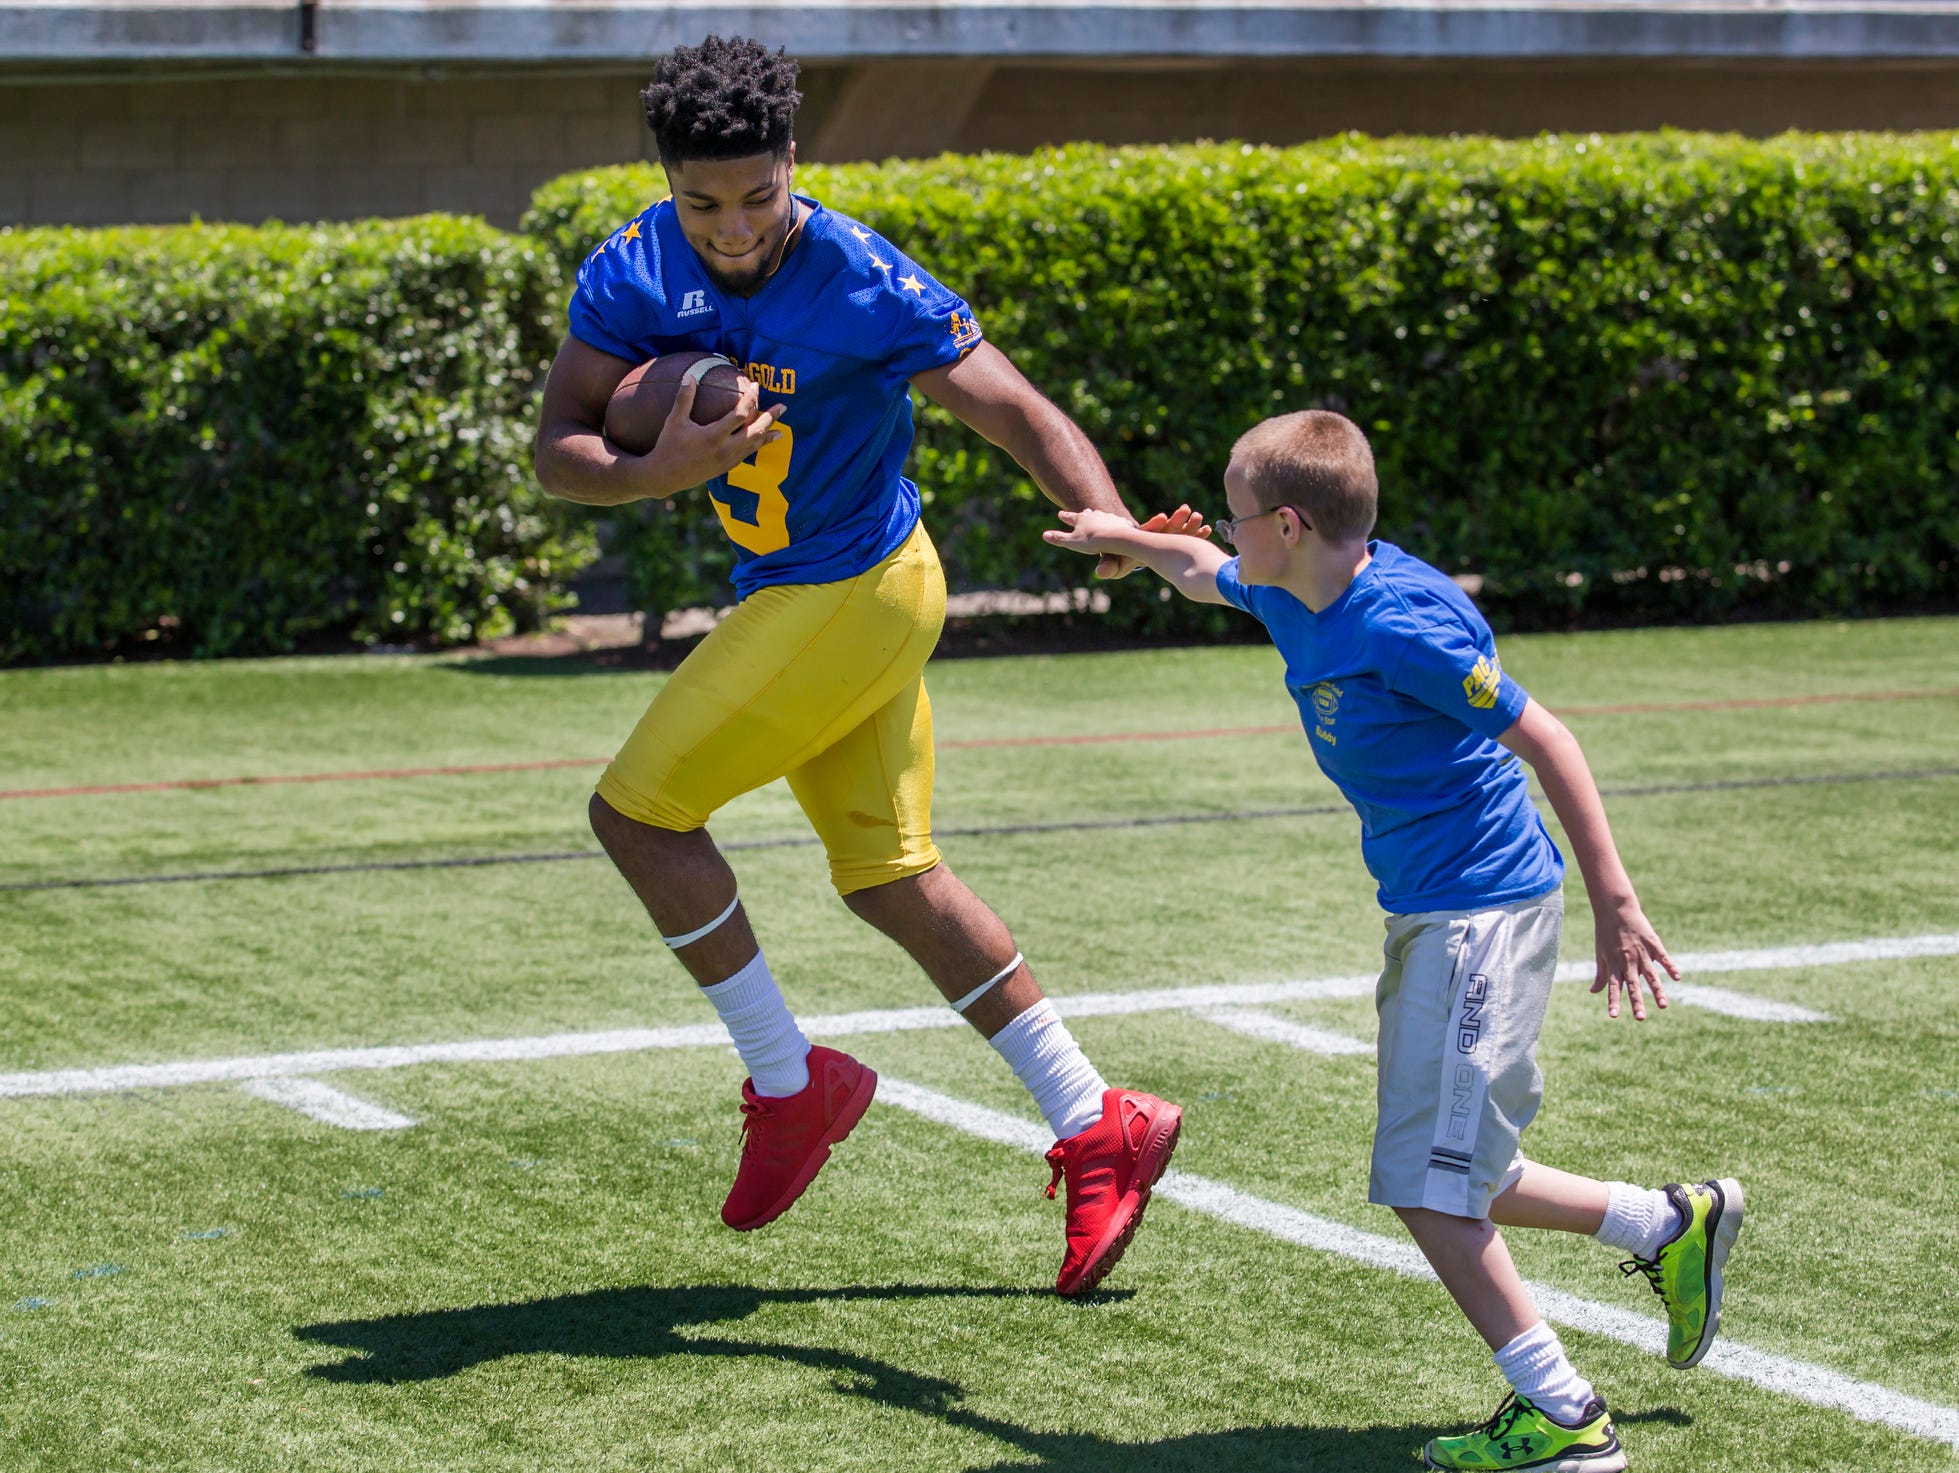 Trevon Bordrick (left) is chased down by 10 year-old Ryan Hallett during the Blue-Gold Football media day at Delaware Stadium in Newark on Sunday afternoon.